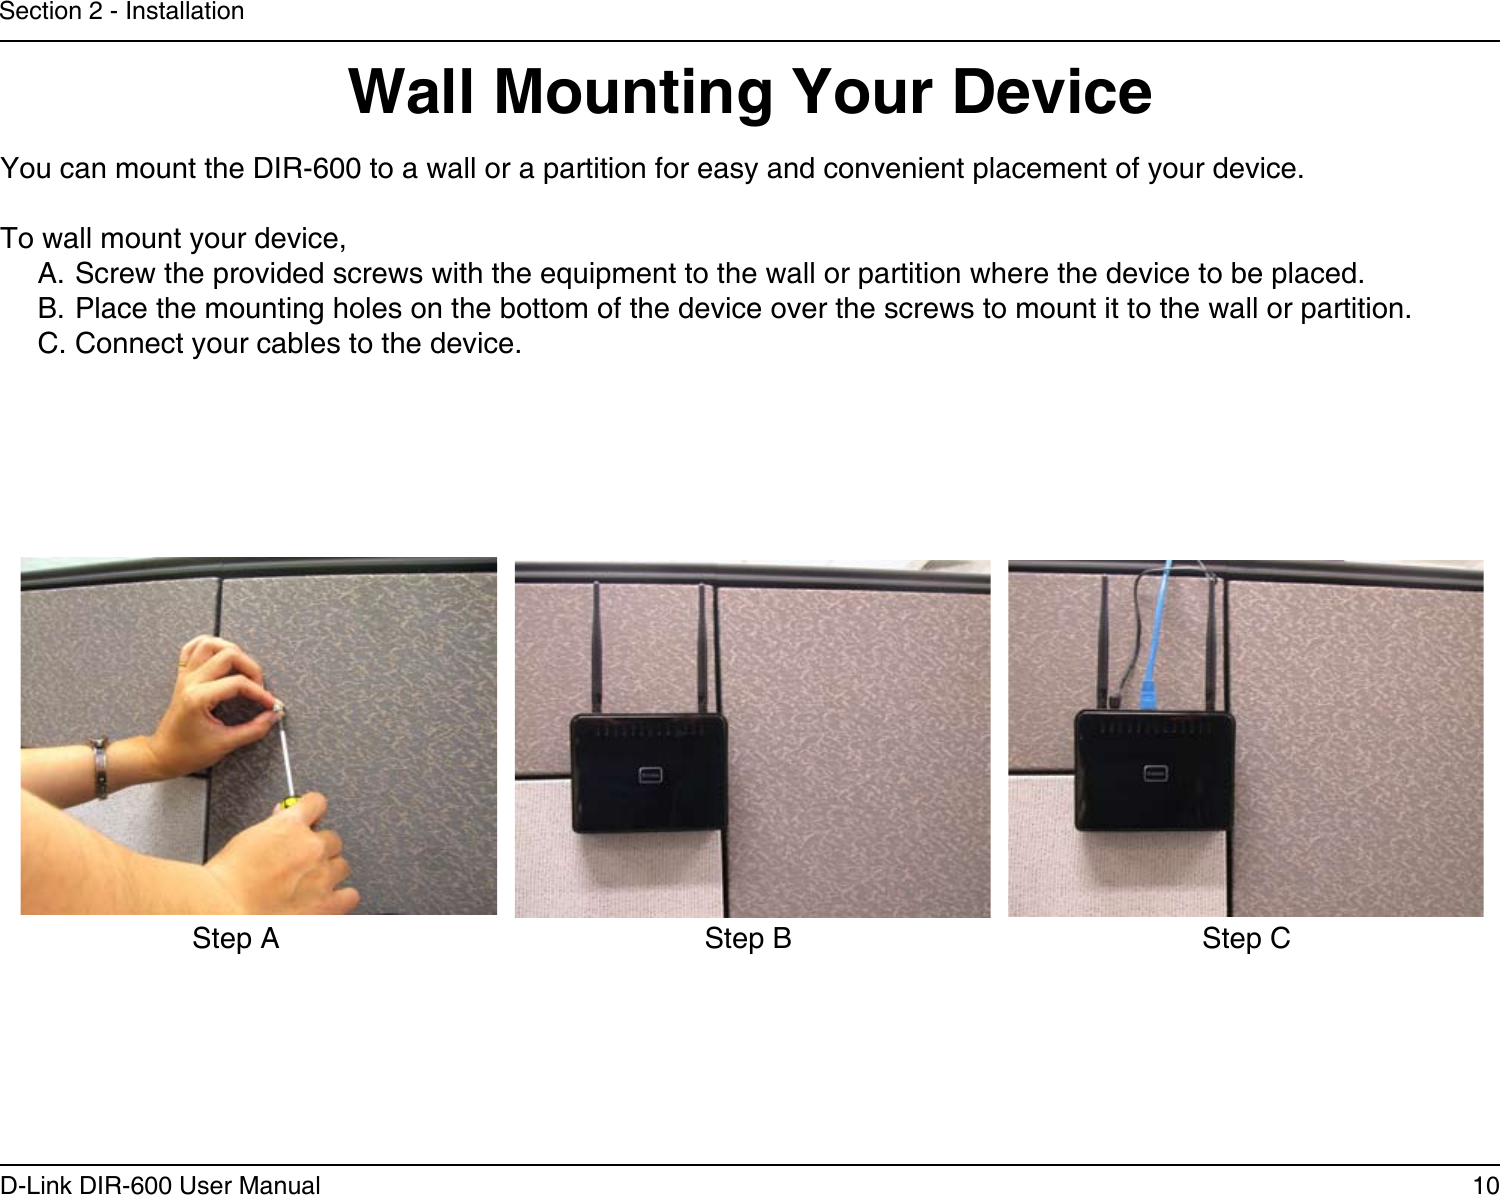 10D-Link DIR-600 User ManualSection 2 - InstallationWall Mounting Your DeviceYou can mount the DIR-600 to a wall or a partition for easy and convenient placement of your device.To wall mount your device,A. Screw the provided screws with the equipment to the wall or partition where the device to be placed.B. Place the mounting holes on the bottom of the device over the screws to mount it to the wall or partition.C. Connect your cables to the device.Step A Step B Step C